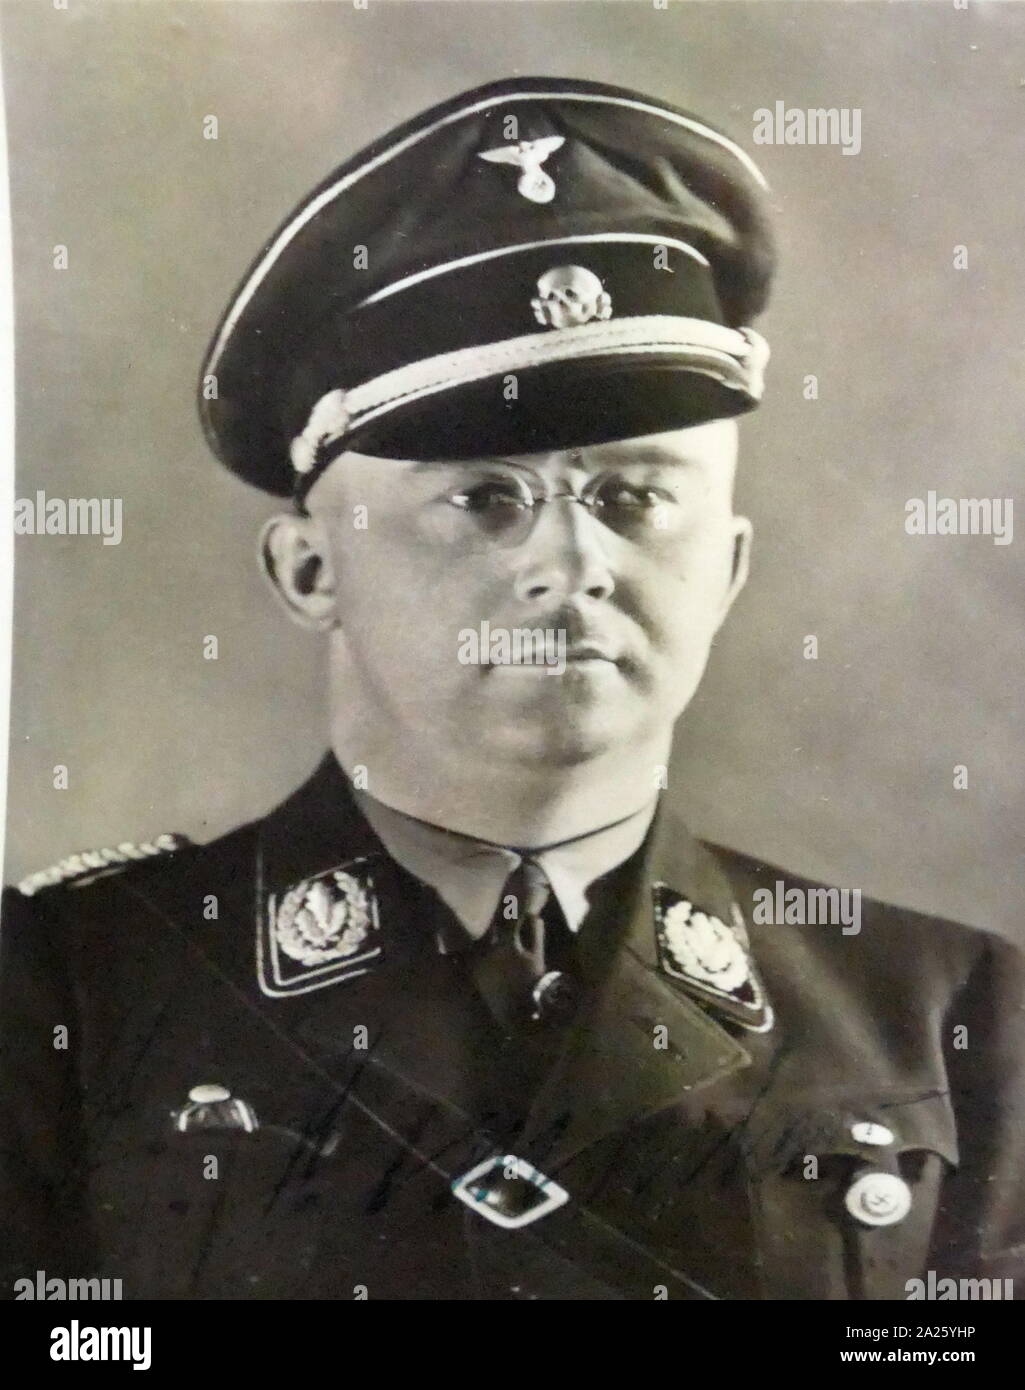 Photograph of Heinrich Himmler. Heinrich Luitpold Himmler (1900-1945) Reichsfuhrer of the Schutzstaffe, and a leading member of the Nazi Party of Germany. Stock Photo